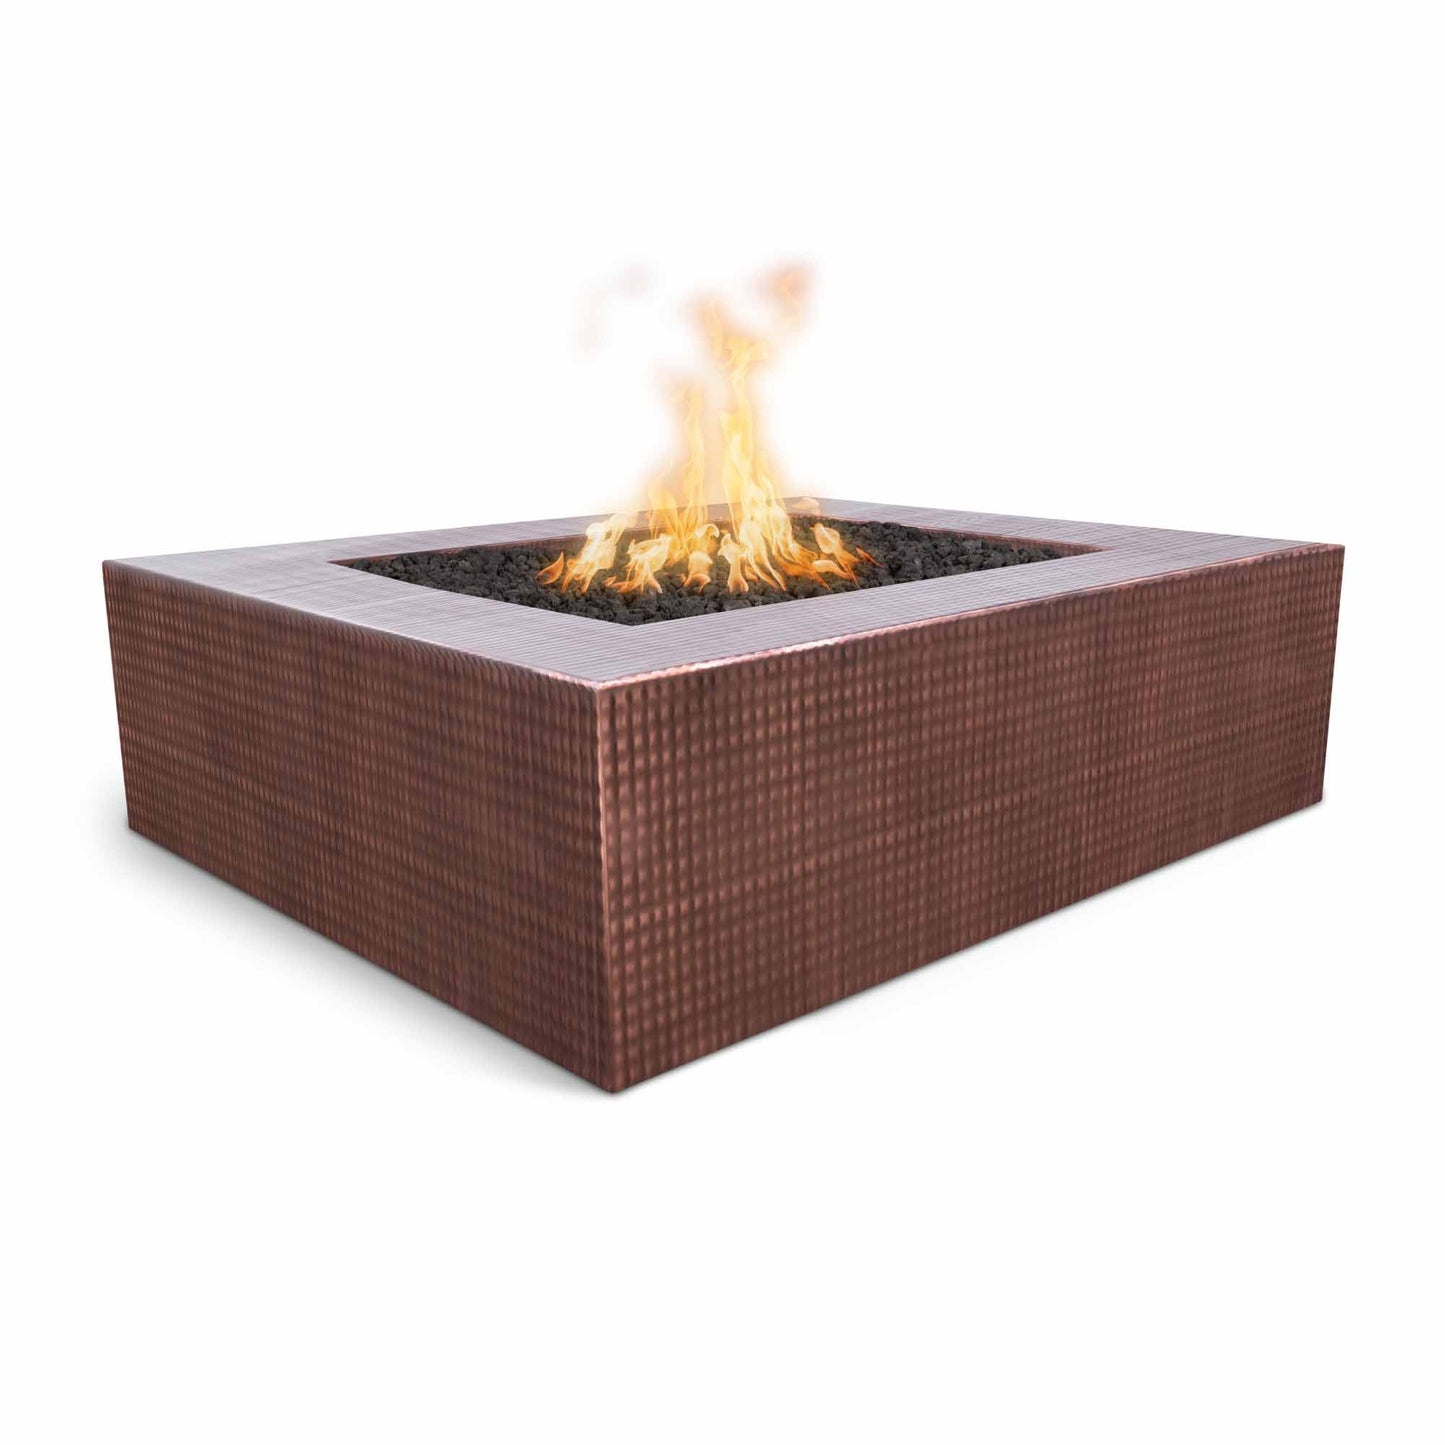 The Outdoor Plus Square Quad 36" Hammered Copper Liquid Propane Fire Pit with 12V Electronic Ignition